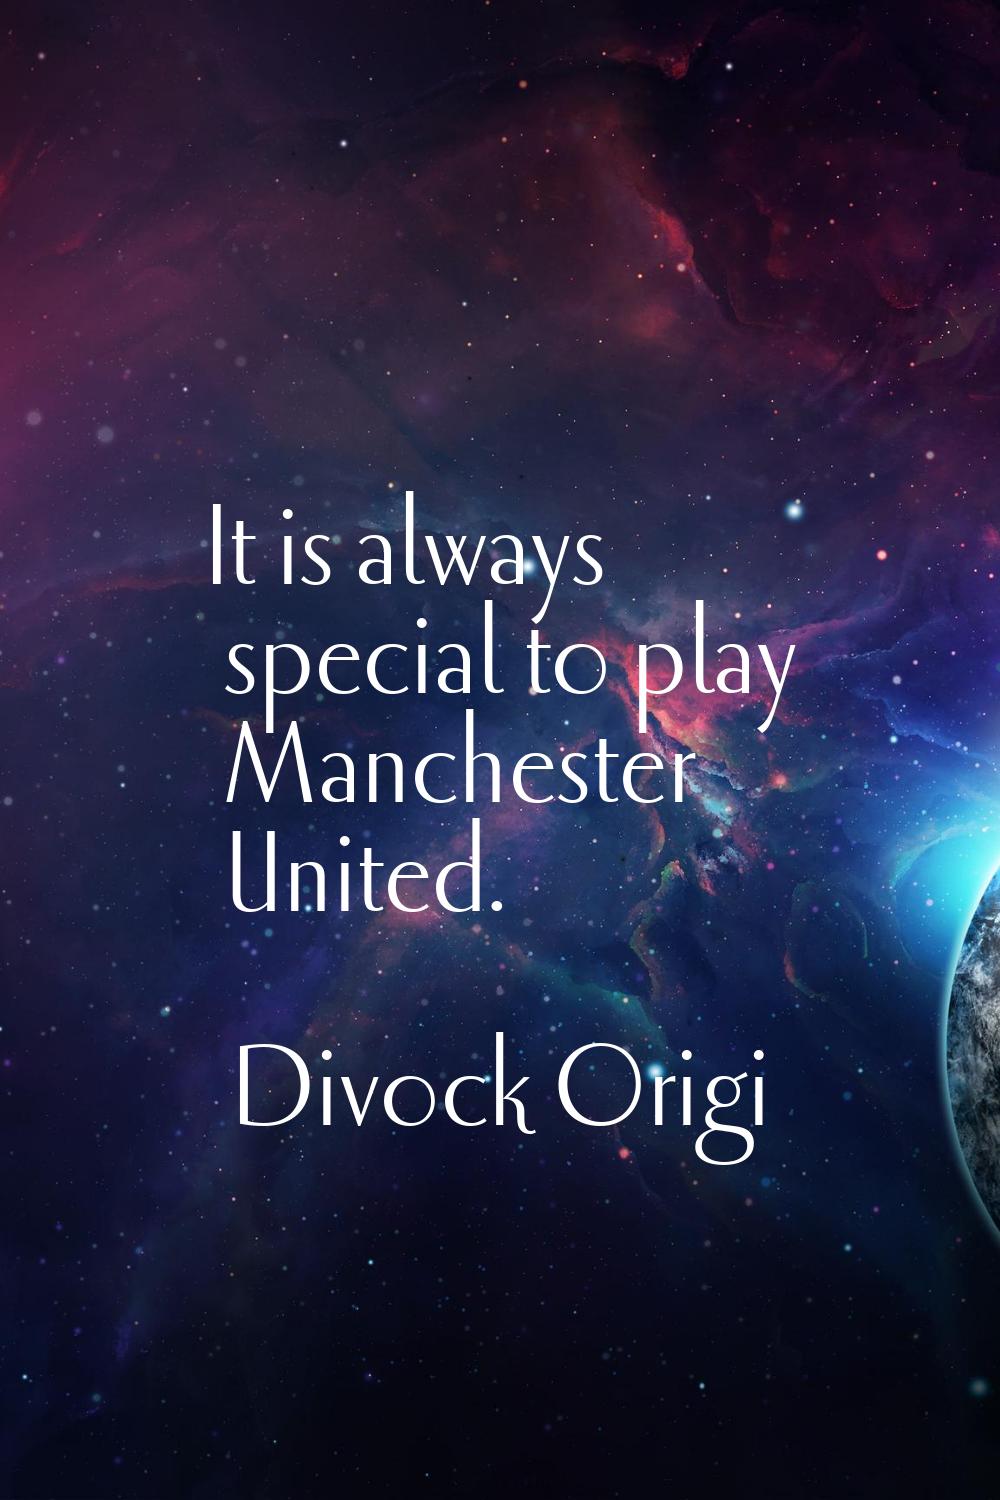 It is always special to play Manchester United.